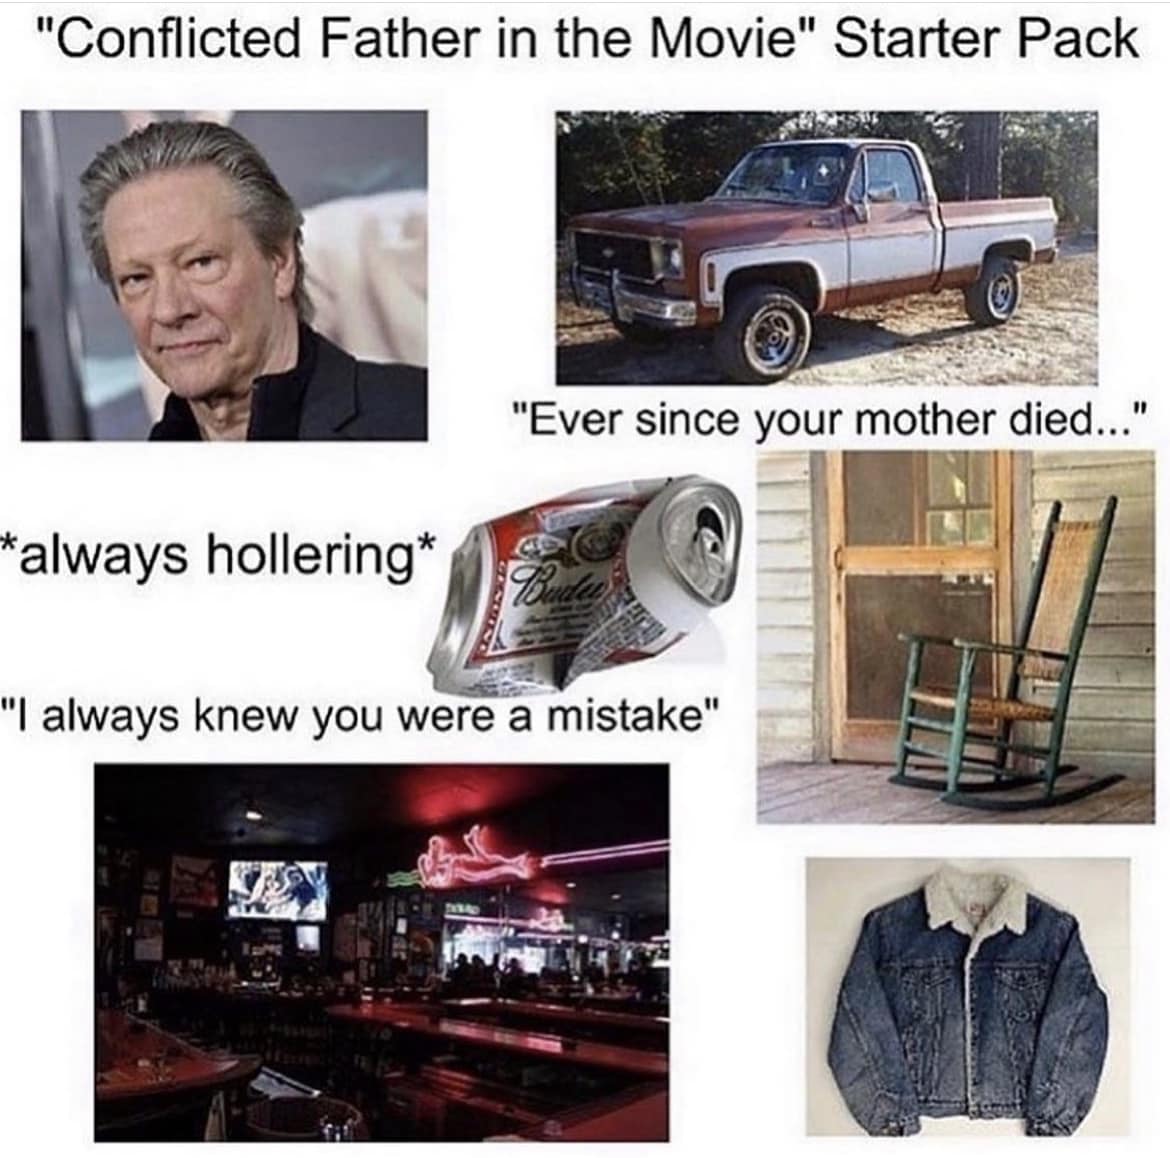 Conflicted father starter pack explaining what’s going to happen in the movie before it starts with six different photos